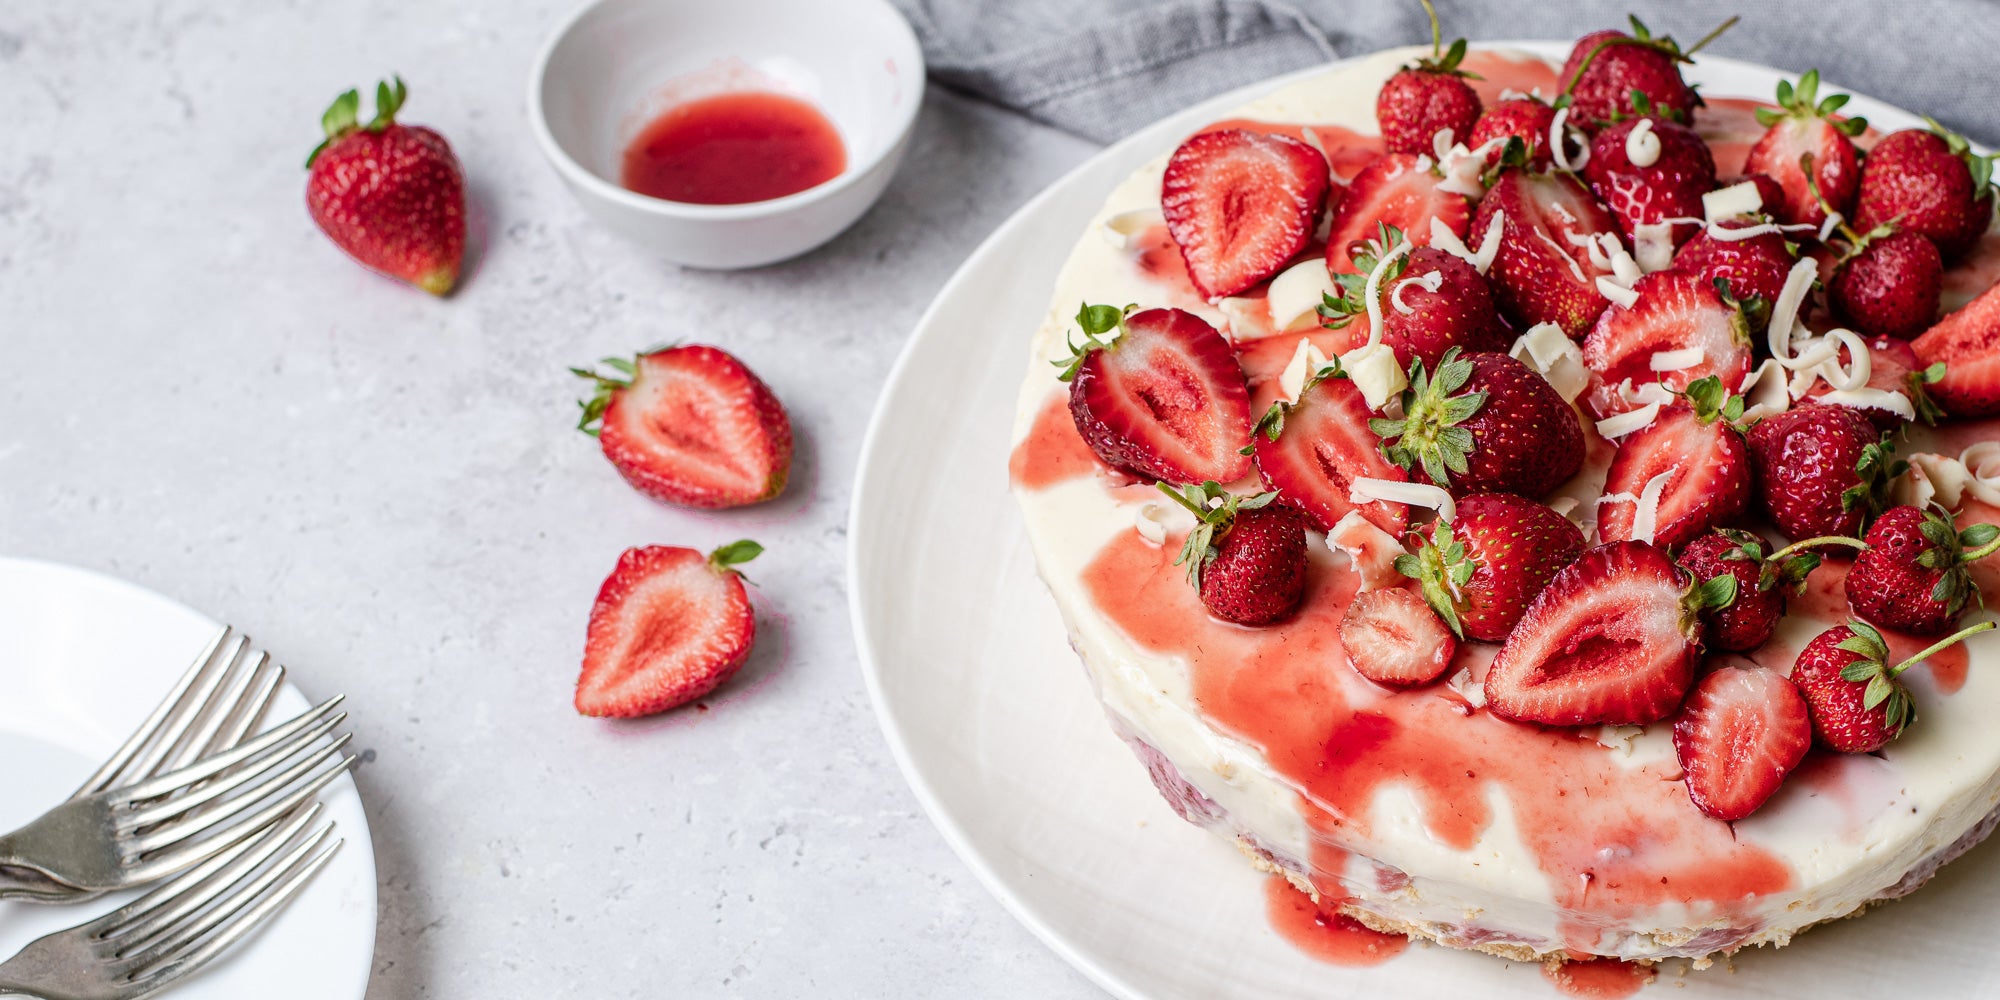 White Chocolate & Strawberry Cheesecake next to slices of strawberries and a small dish of strawberry sauce